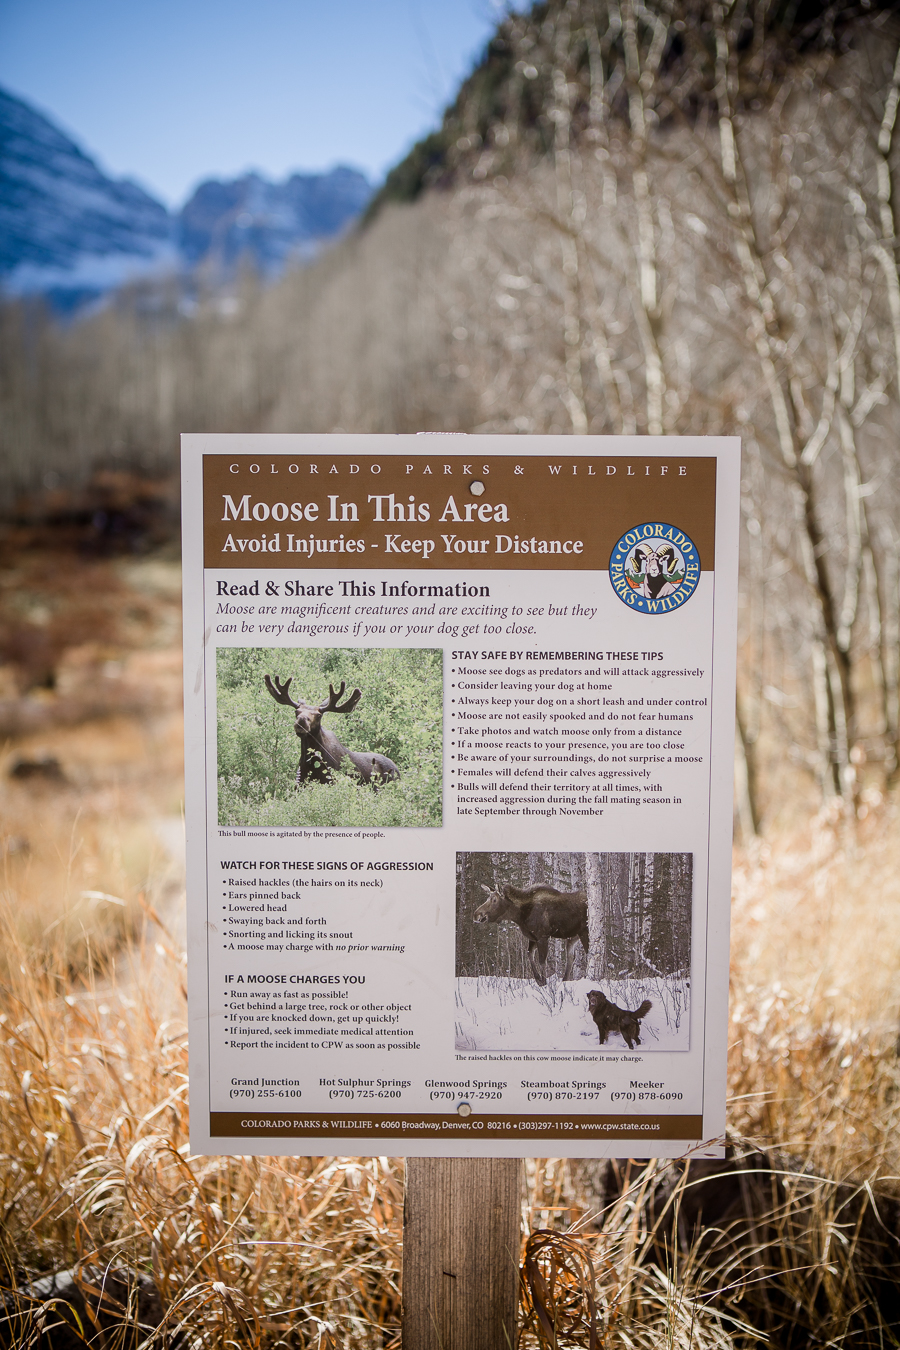 Moose sign in Aspen by Knoxville Wedding Photographer, Amanda May Photos.